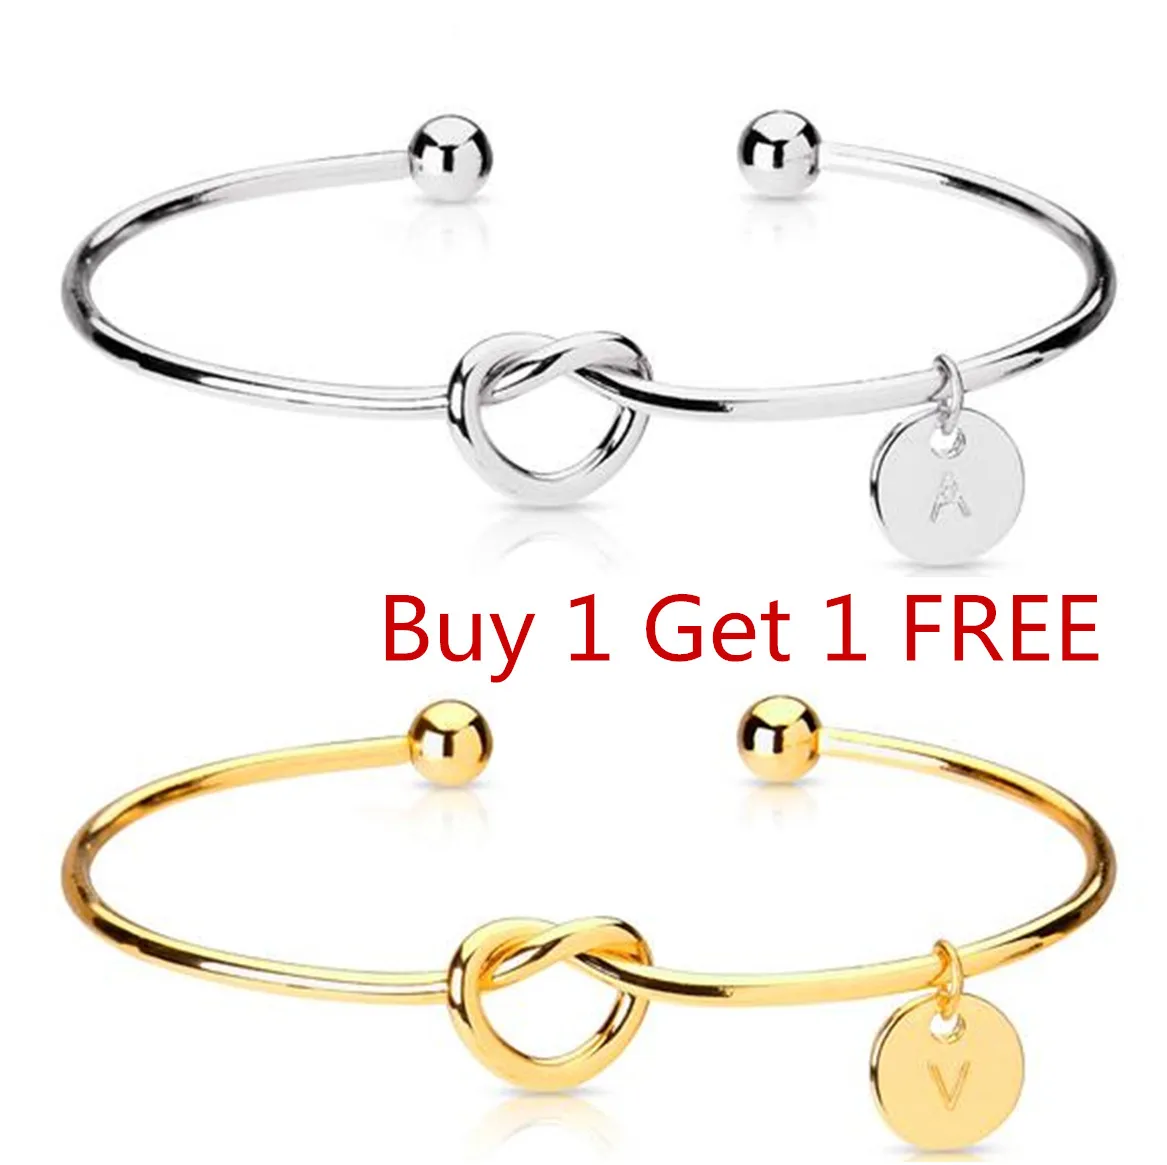 

Buy 1 Get 1 FREE Gift for Personality Initial Knot Bracelet Monogram Bridesmaid Proposal Will You Be My Bridesmaid Gift Bangles